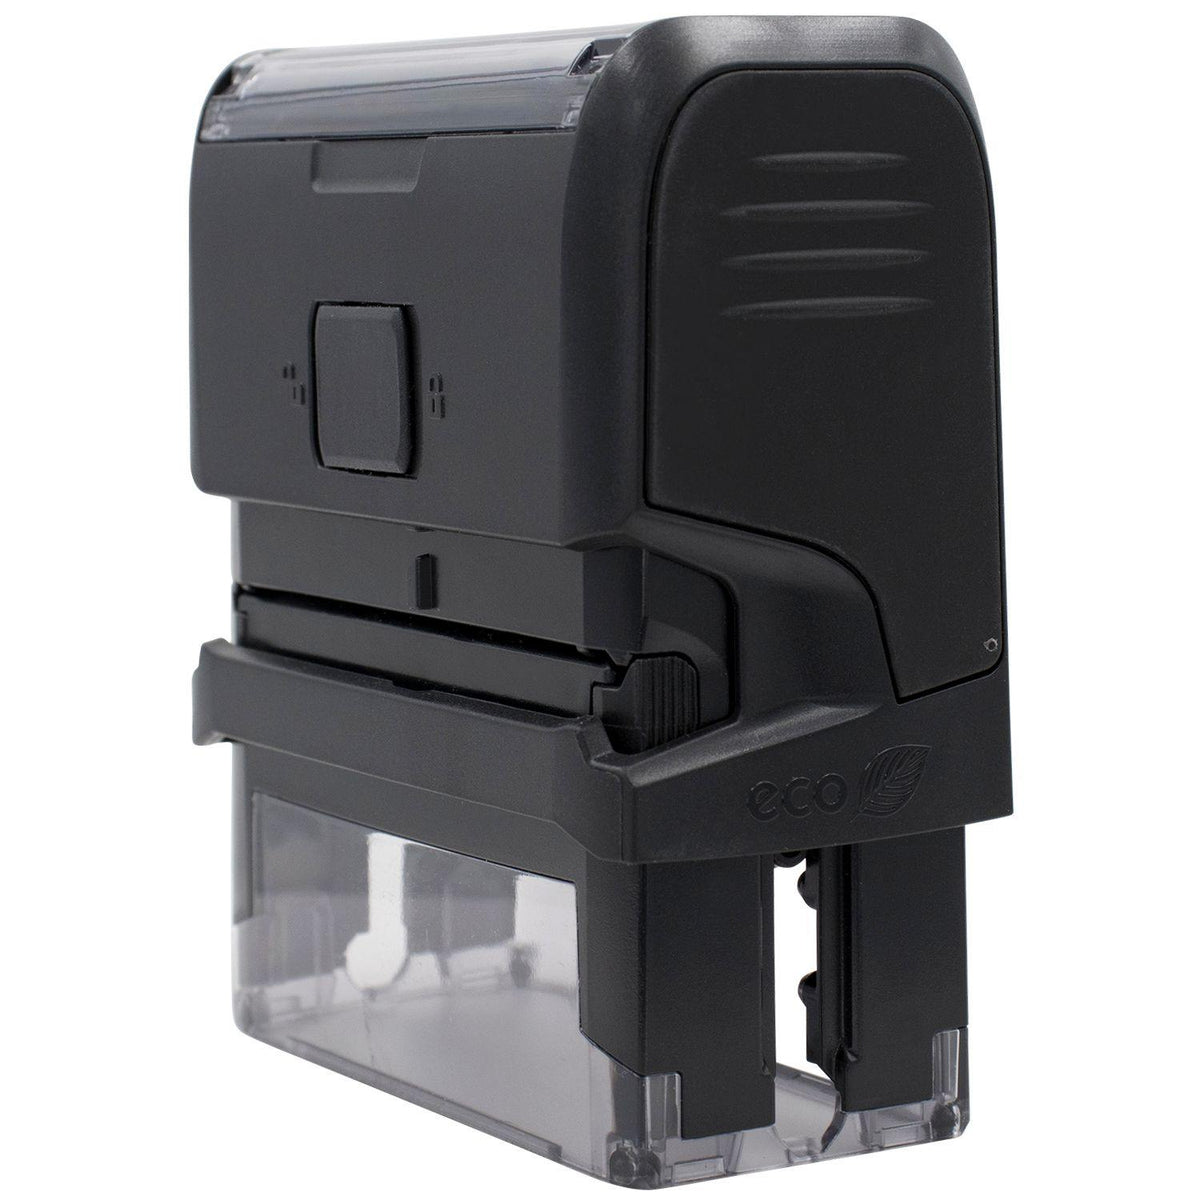 Side View of Large Self Inking Cash Only Stamp at an Angle